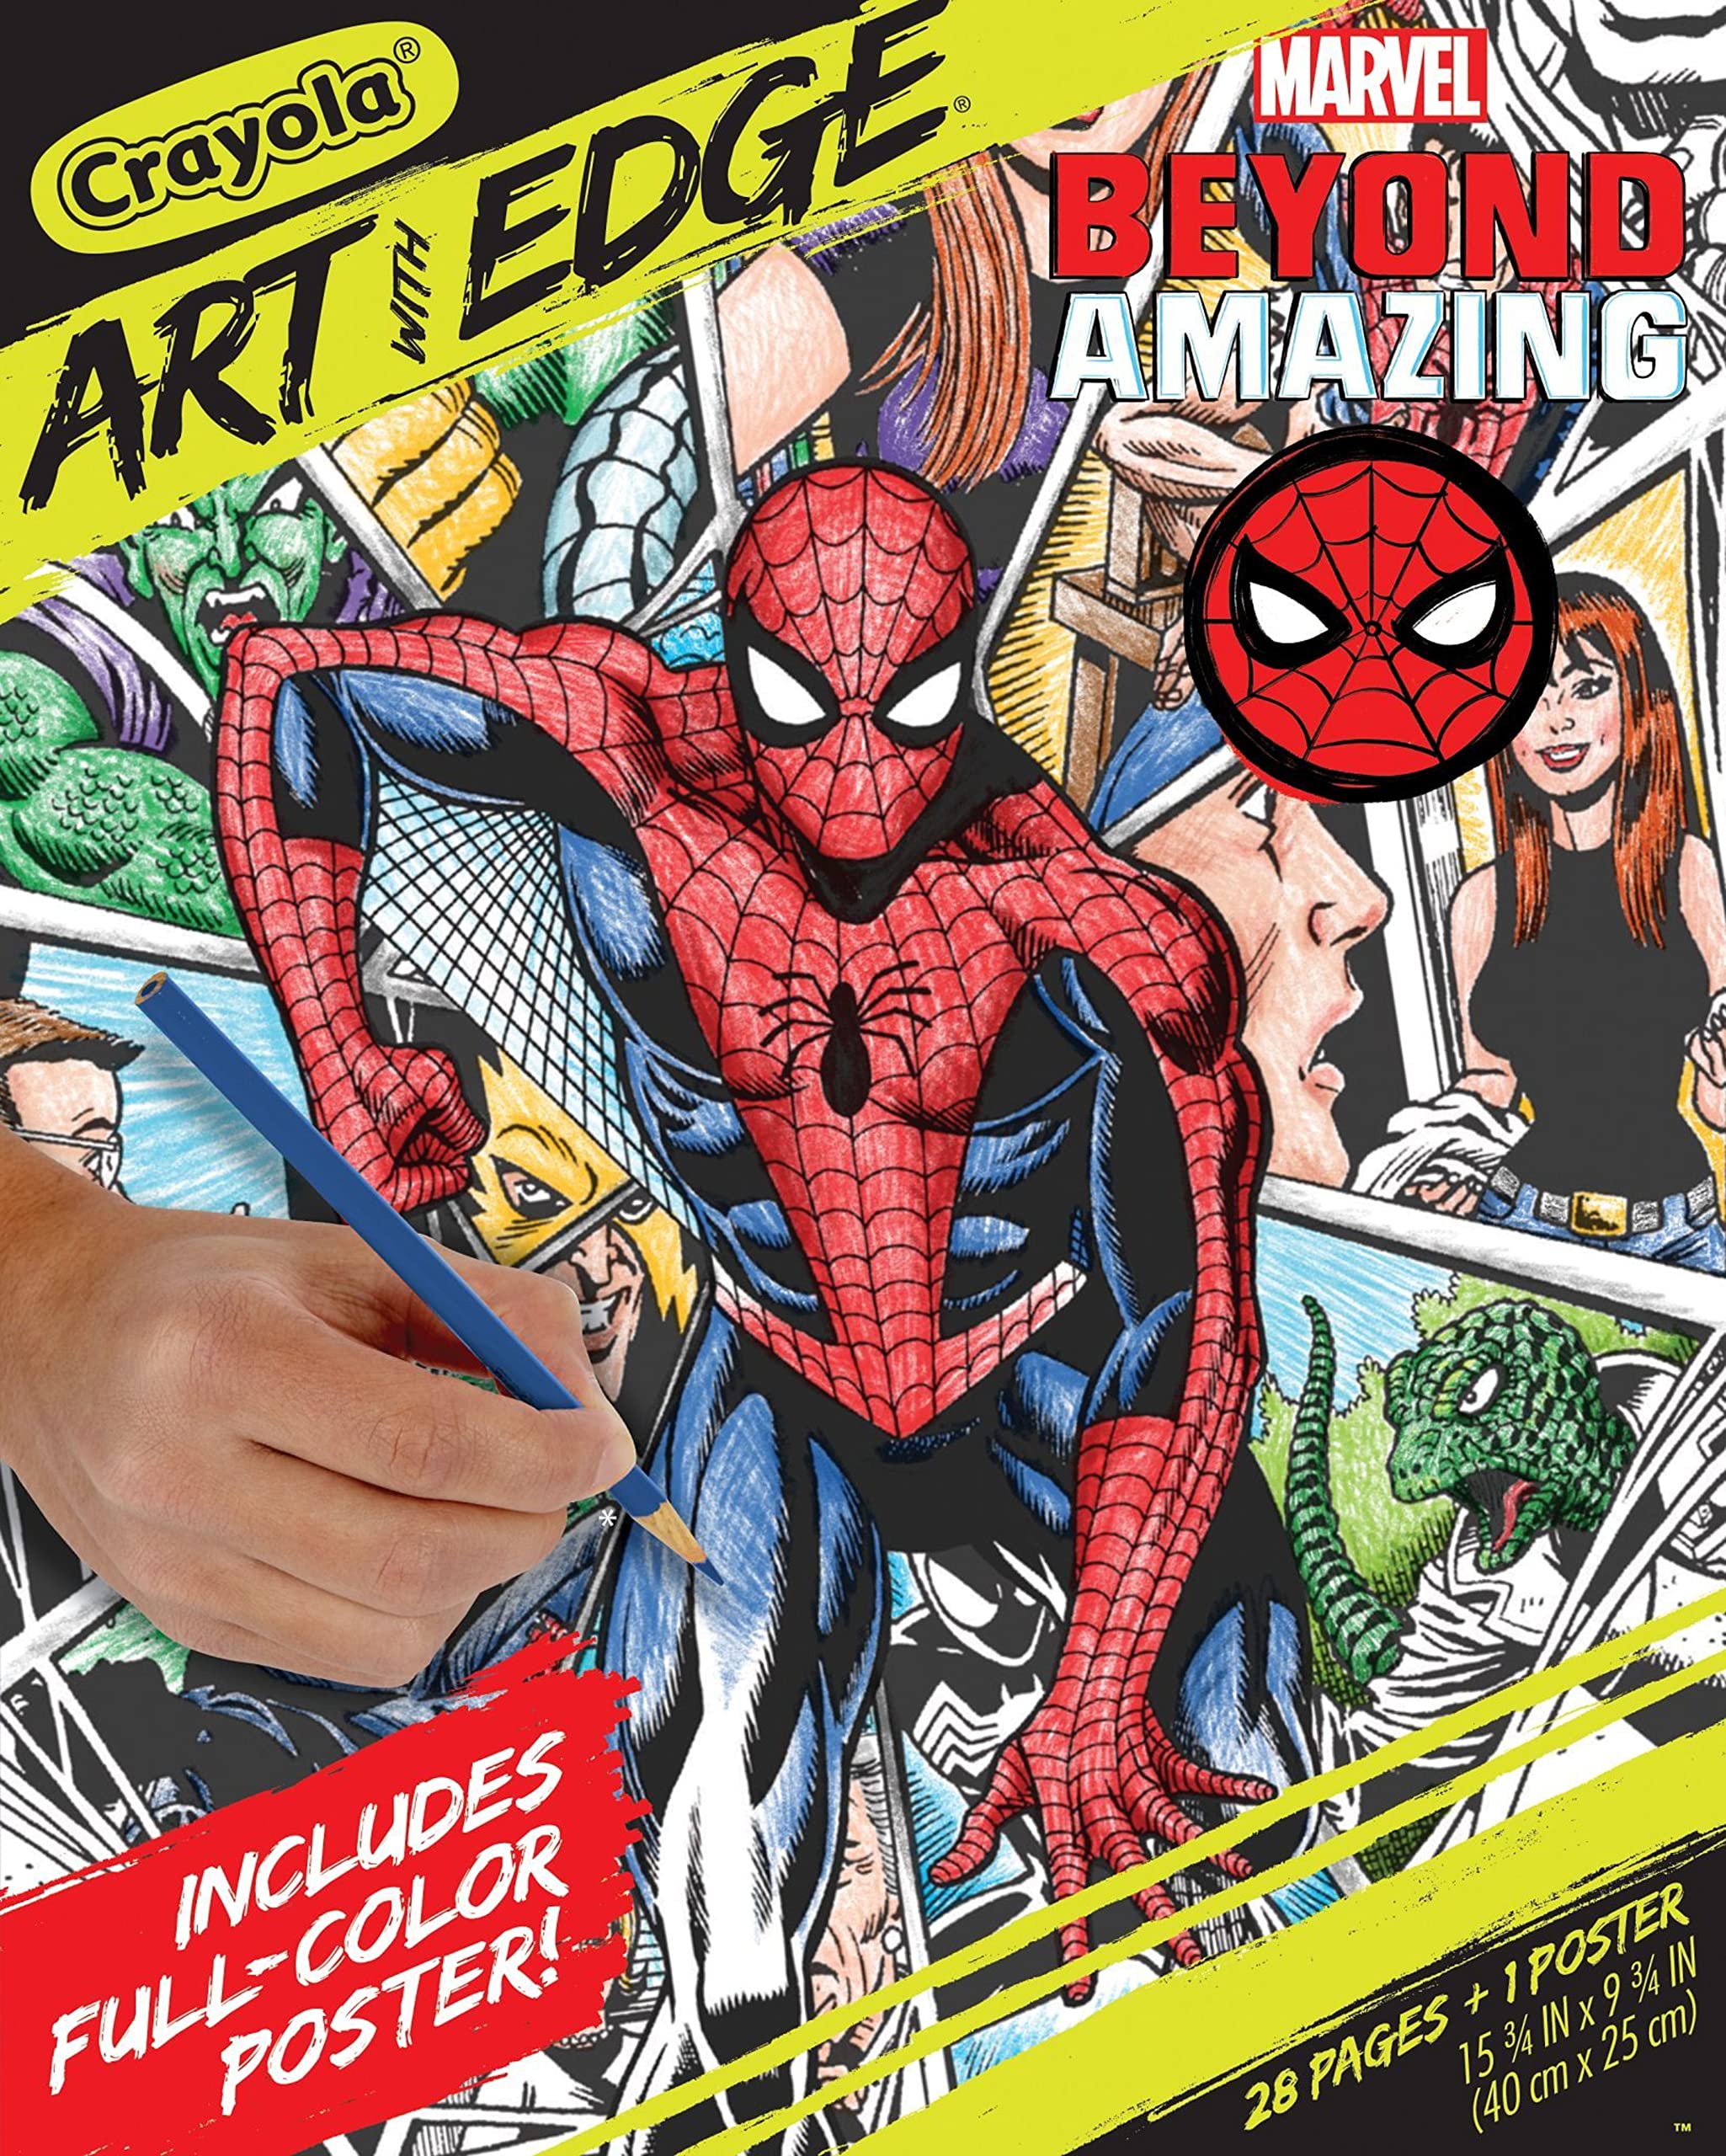 Crayola art with edge spiderman beyond amazing coloring pages pgs spiderman coloring pages adult coloring gift for teens toys games